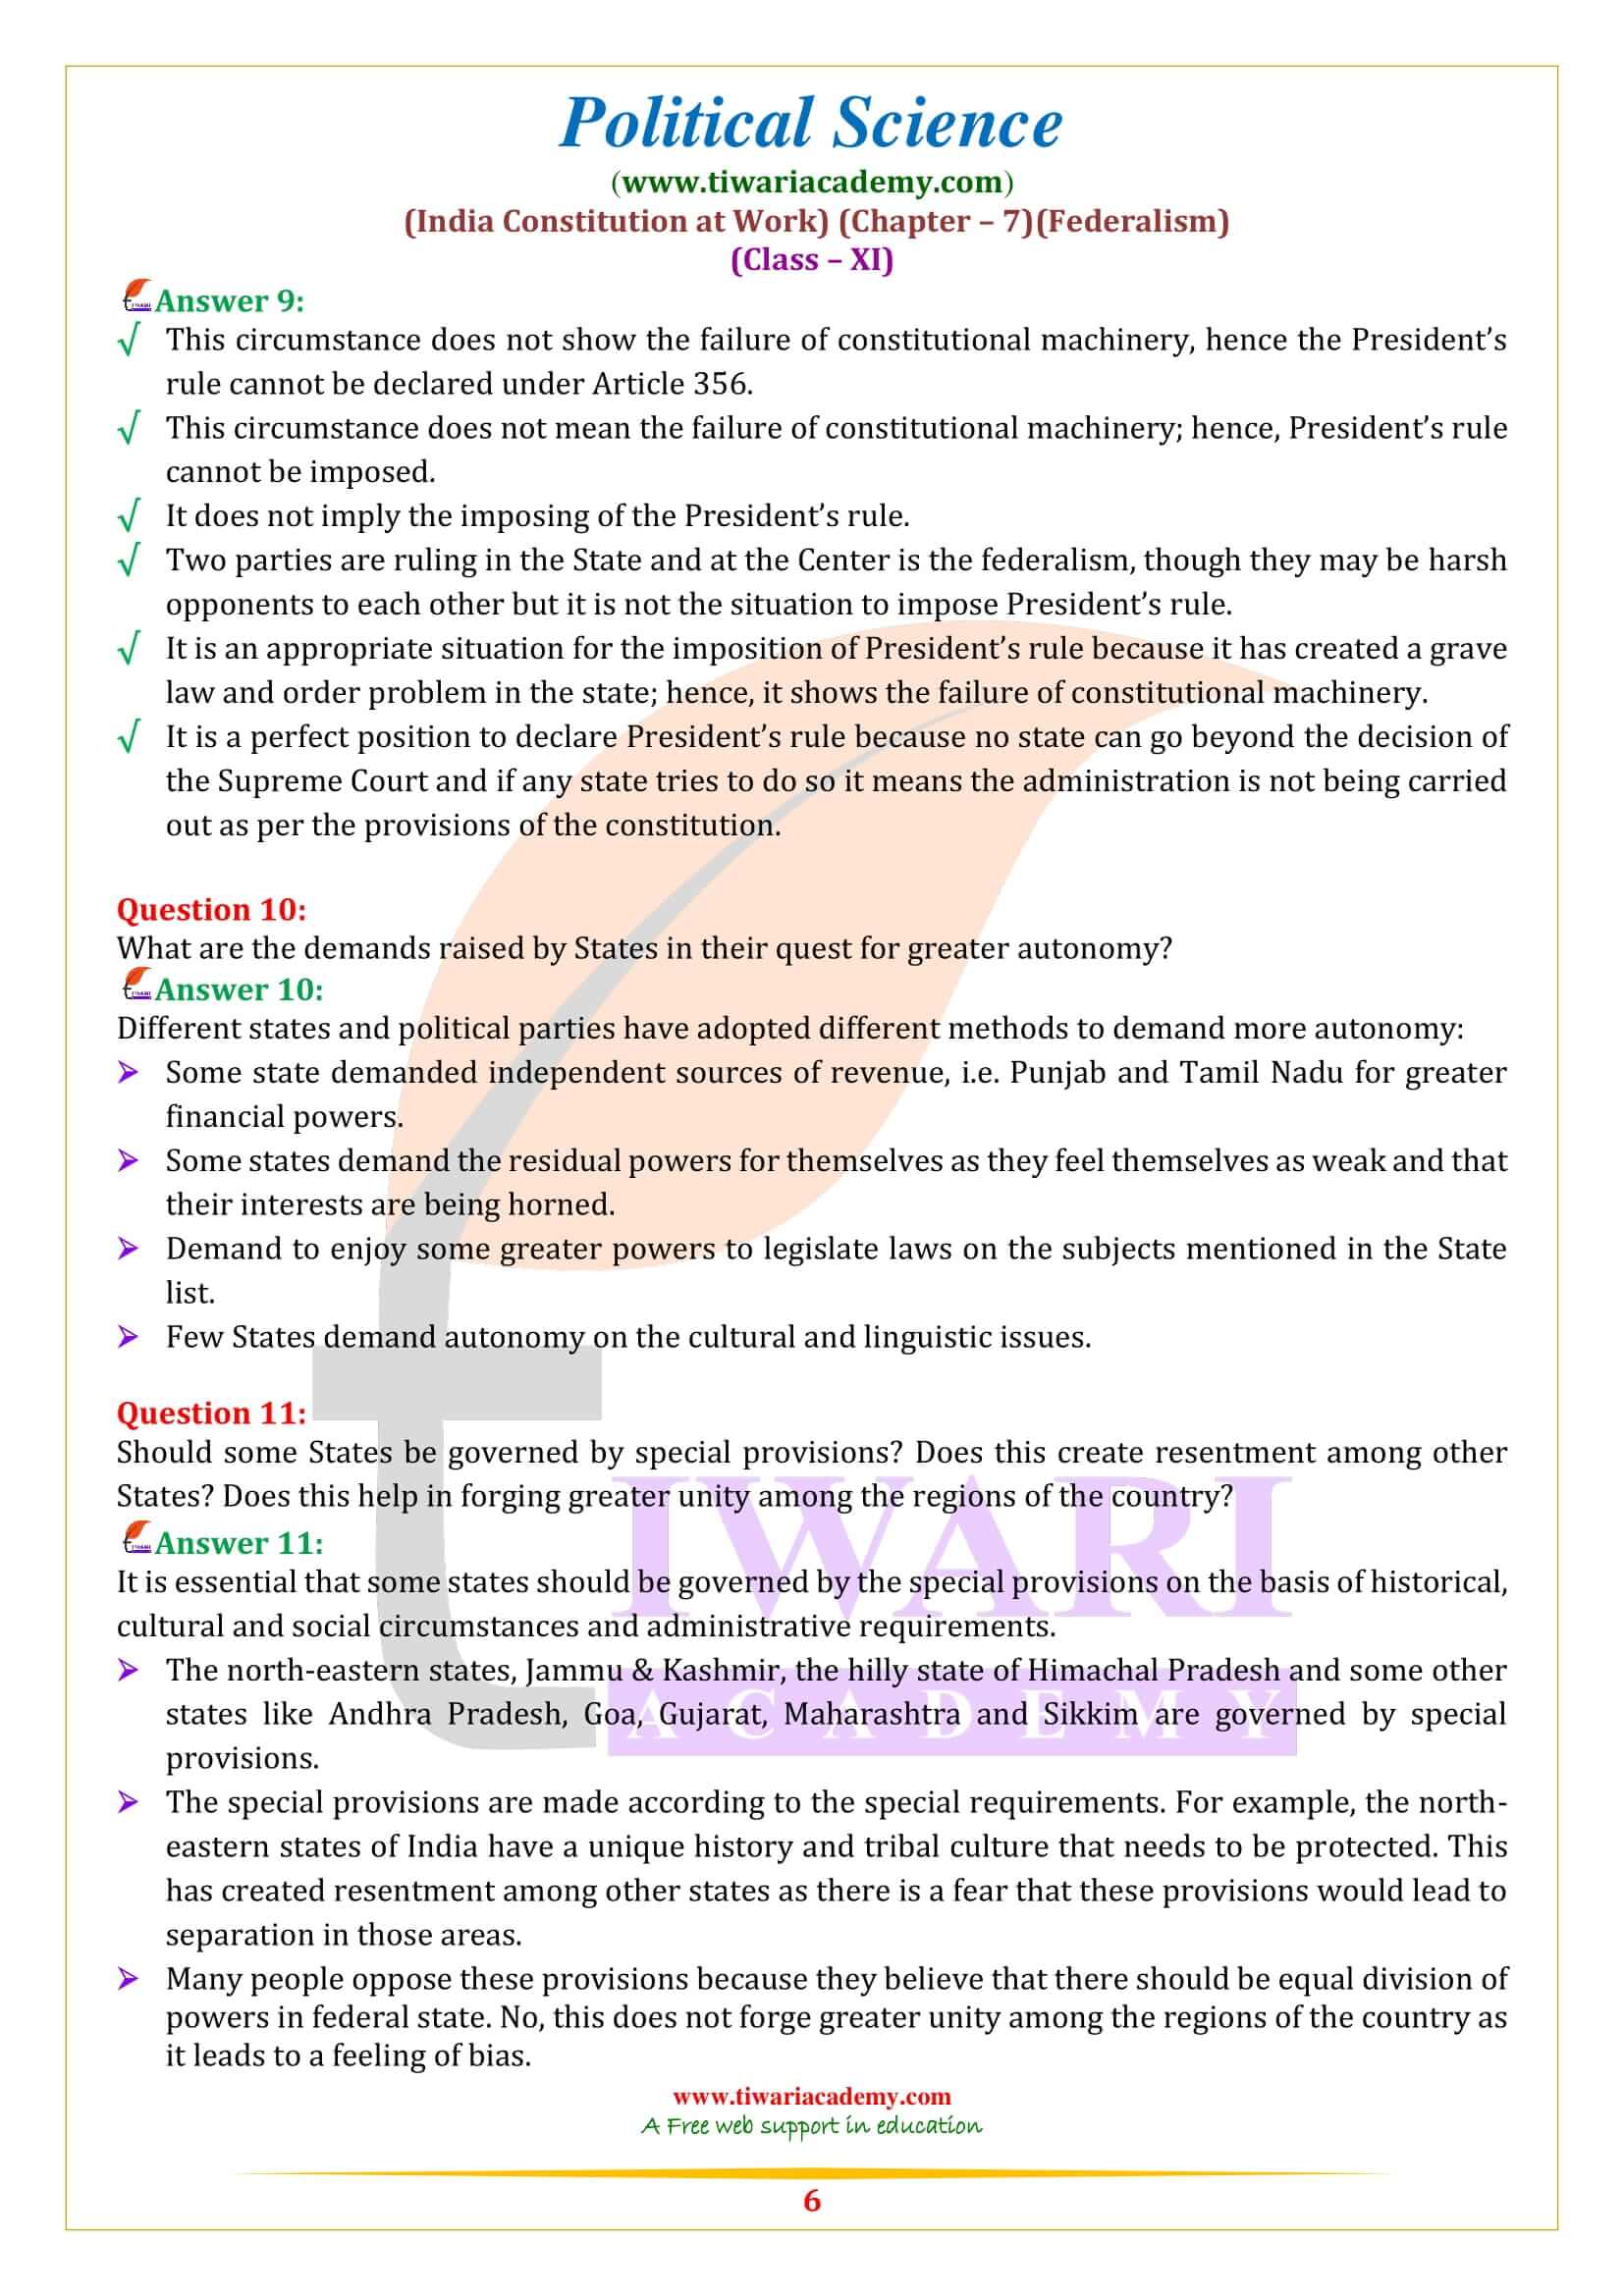 NCERT Solutions for Class 11 Political Science Chapter 7 free guide